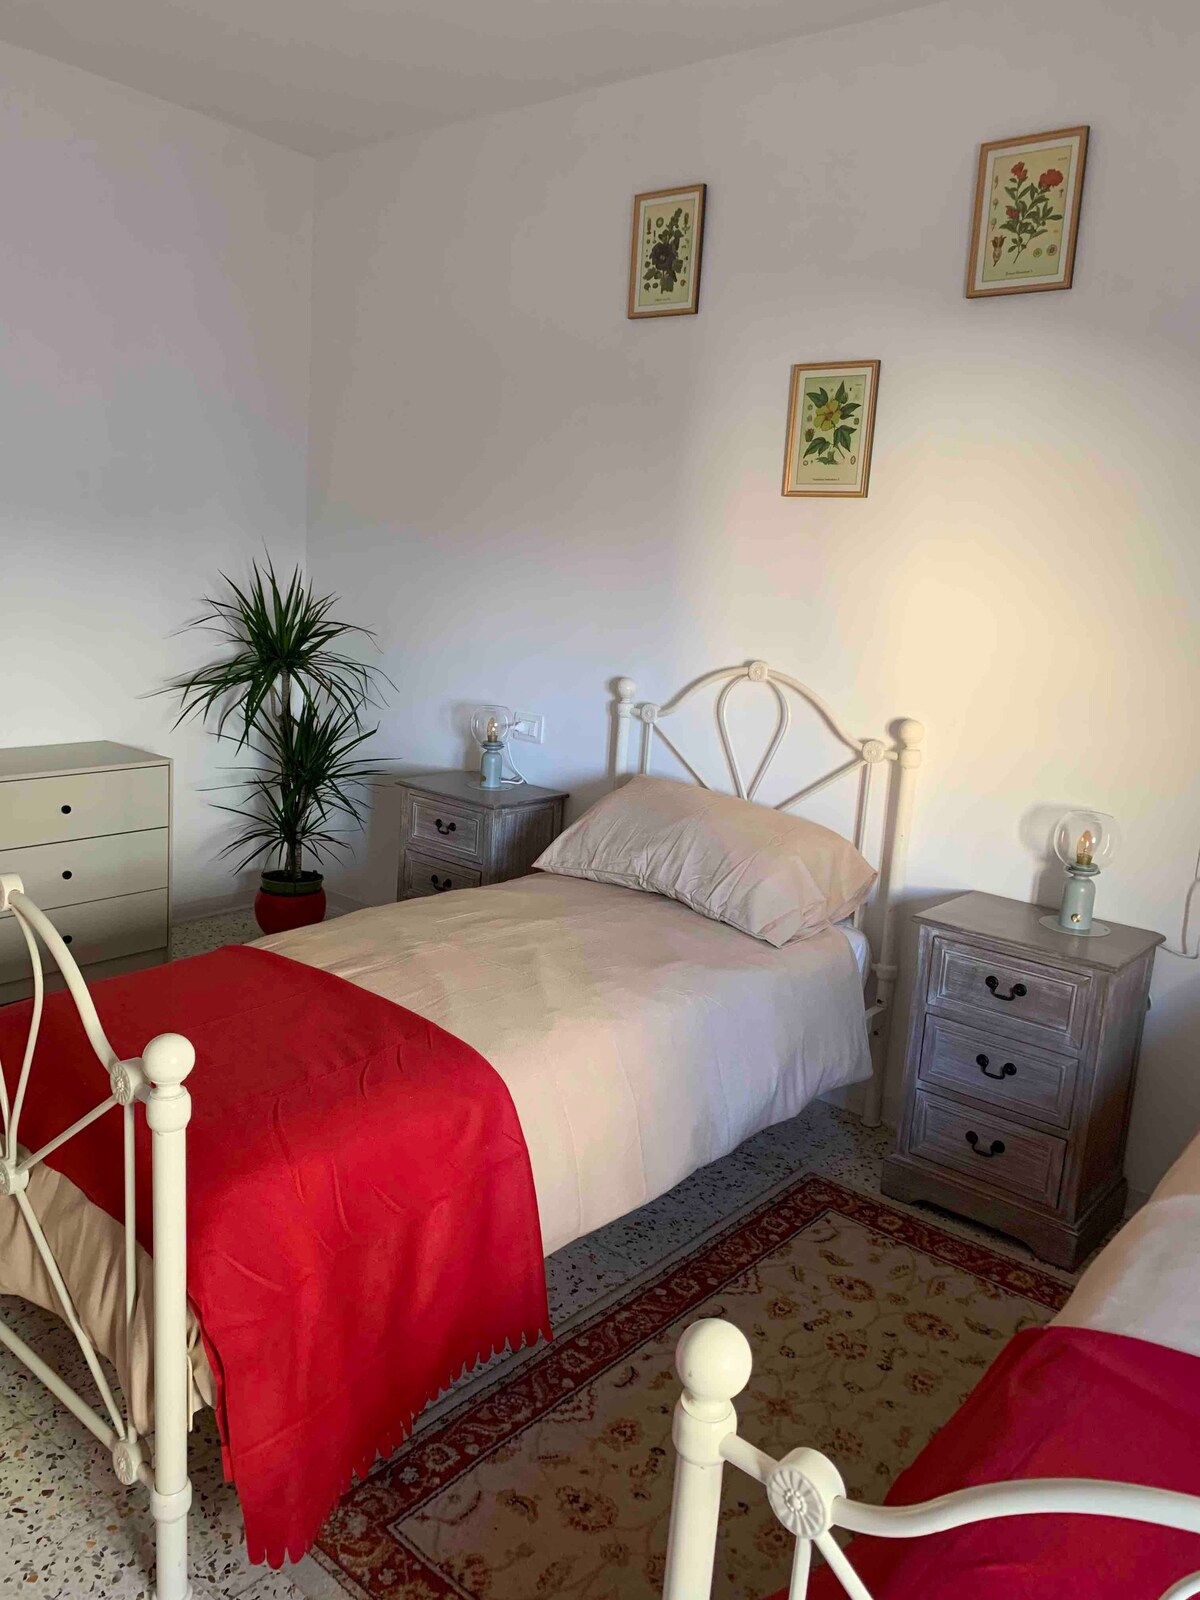 As seen on TV. Cosy town house in casalanguida